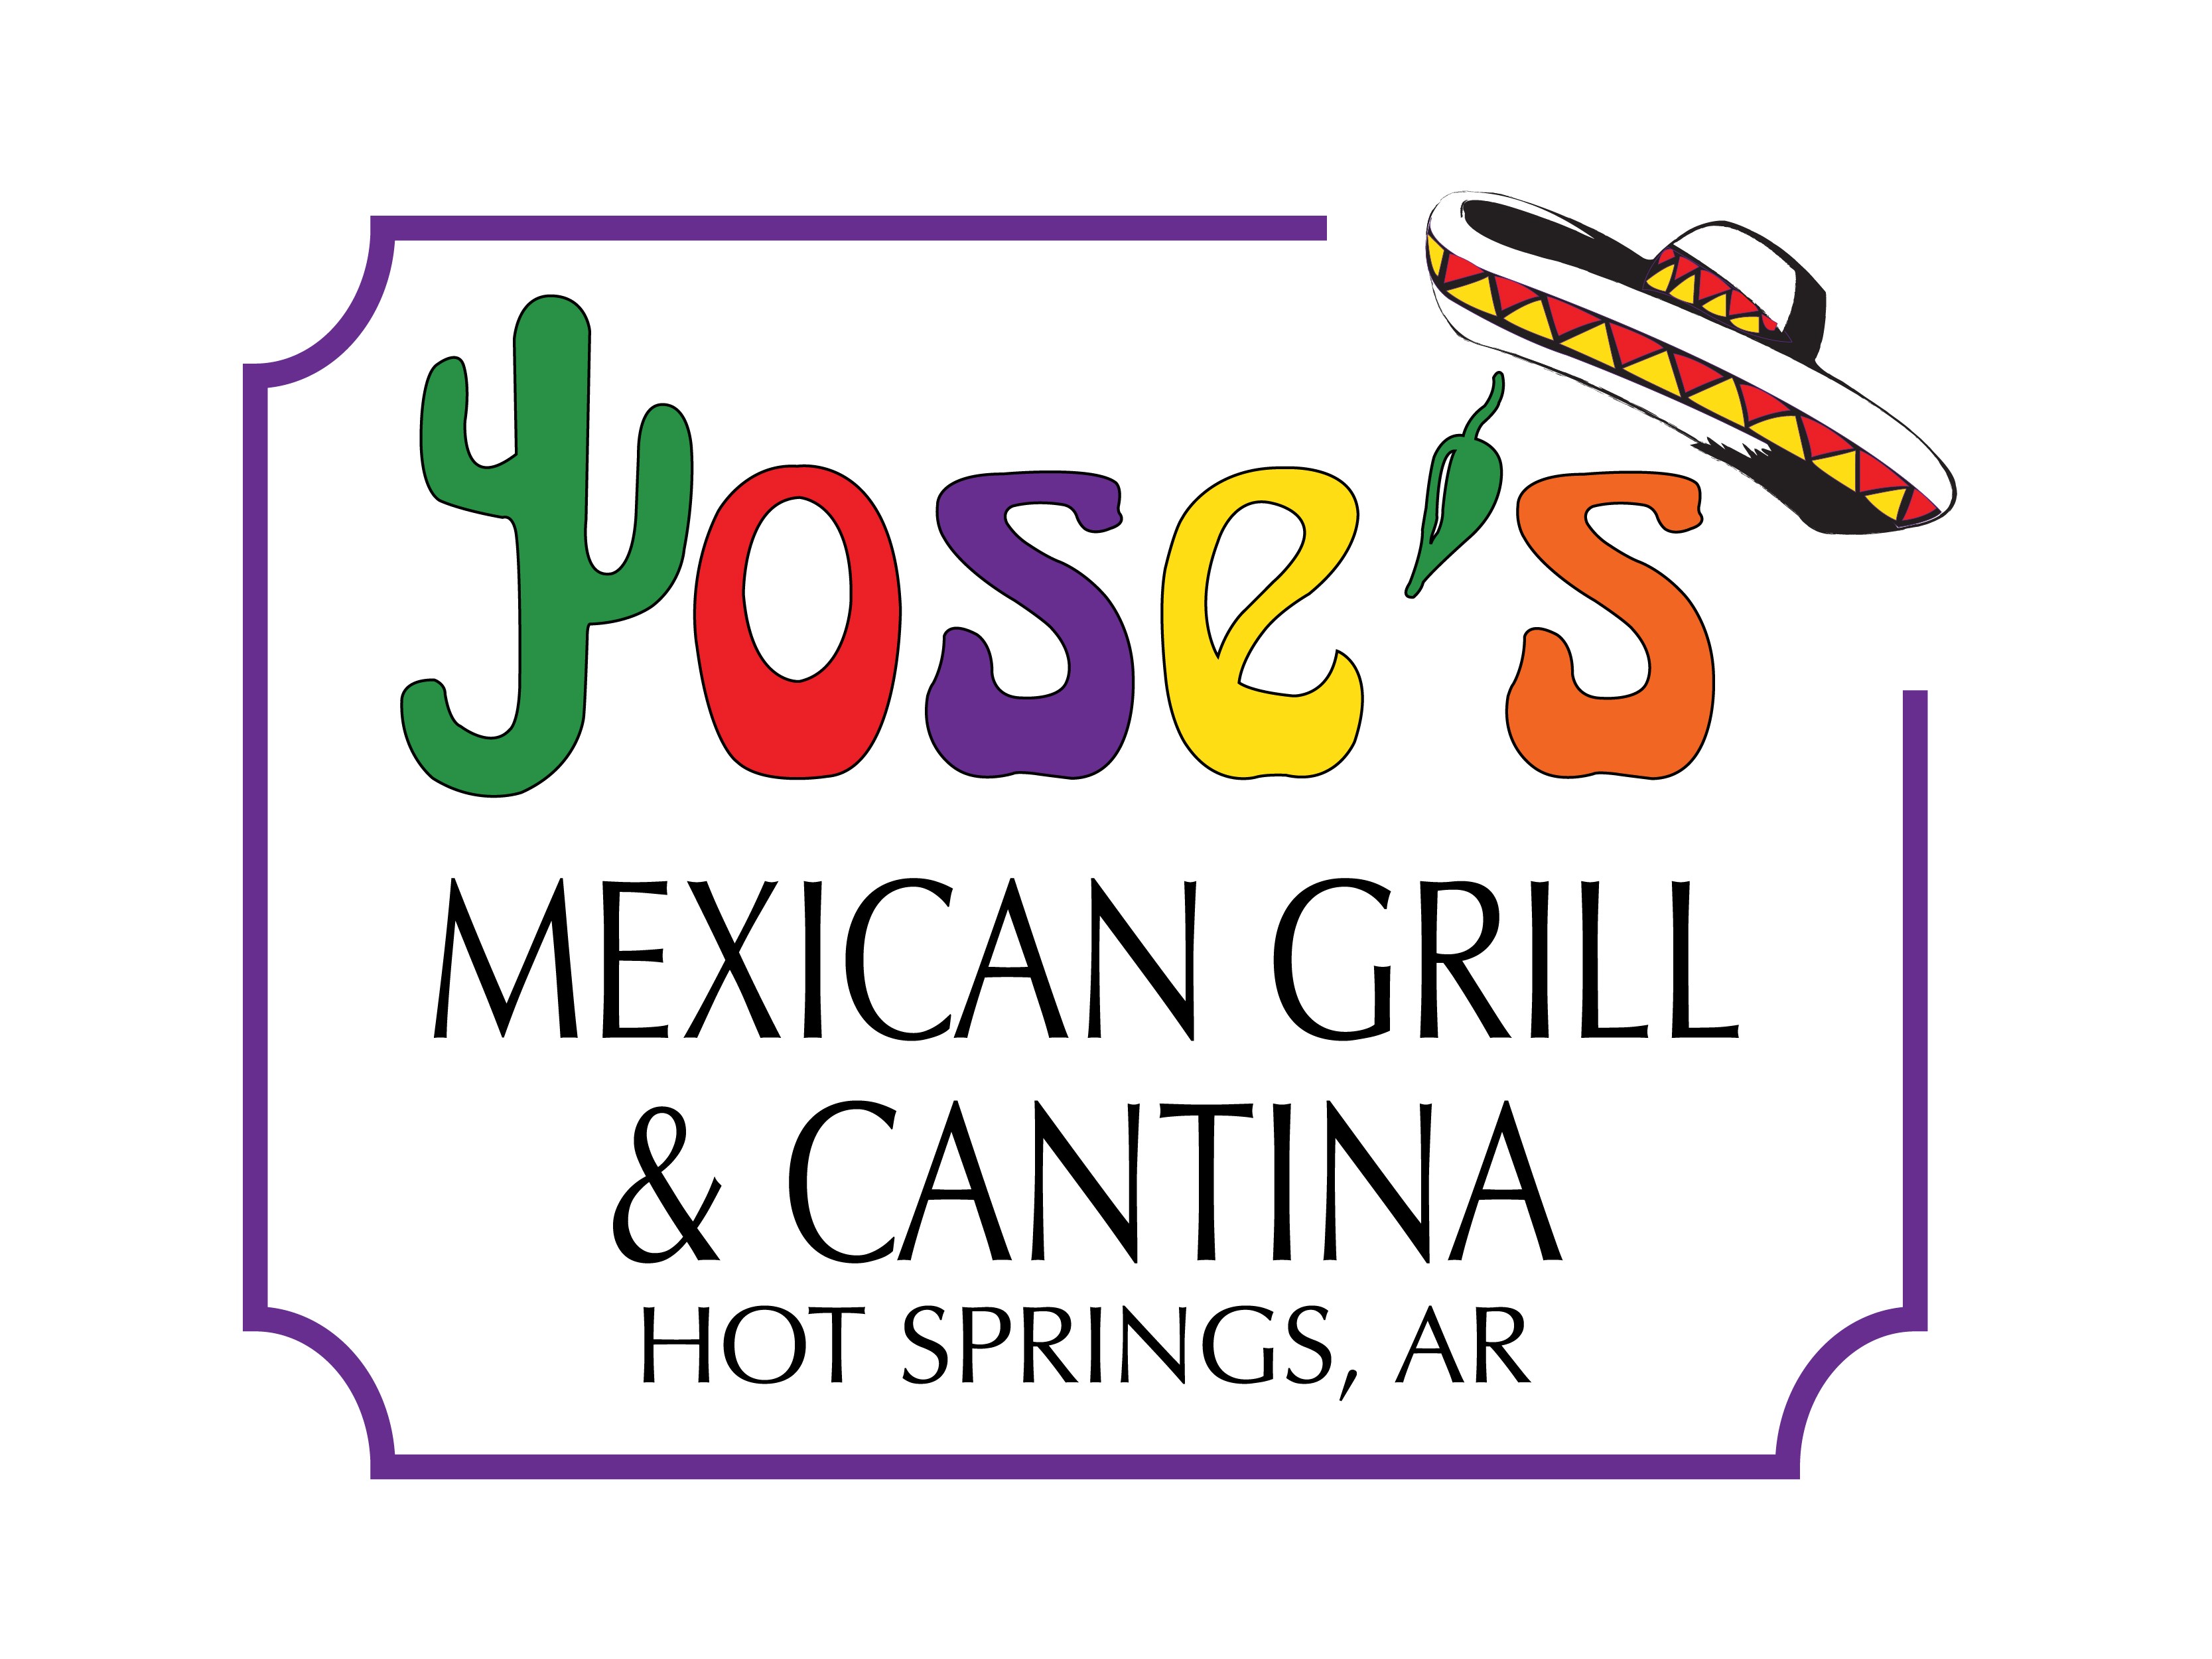 Jose's Mexican Grill and Cantina - CENTRAL AVE.